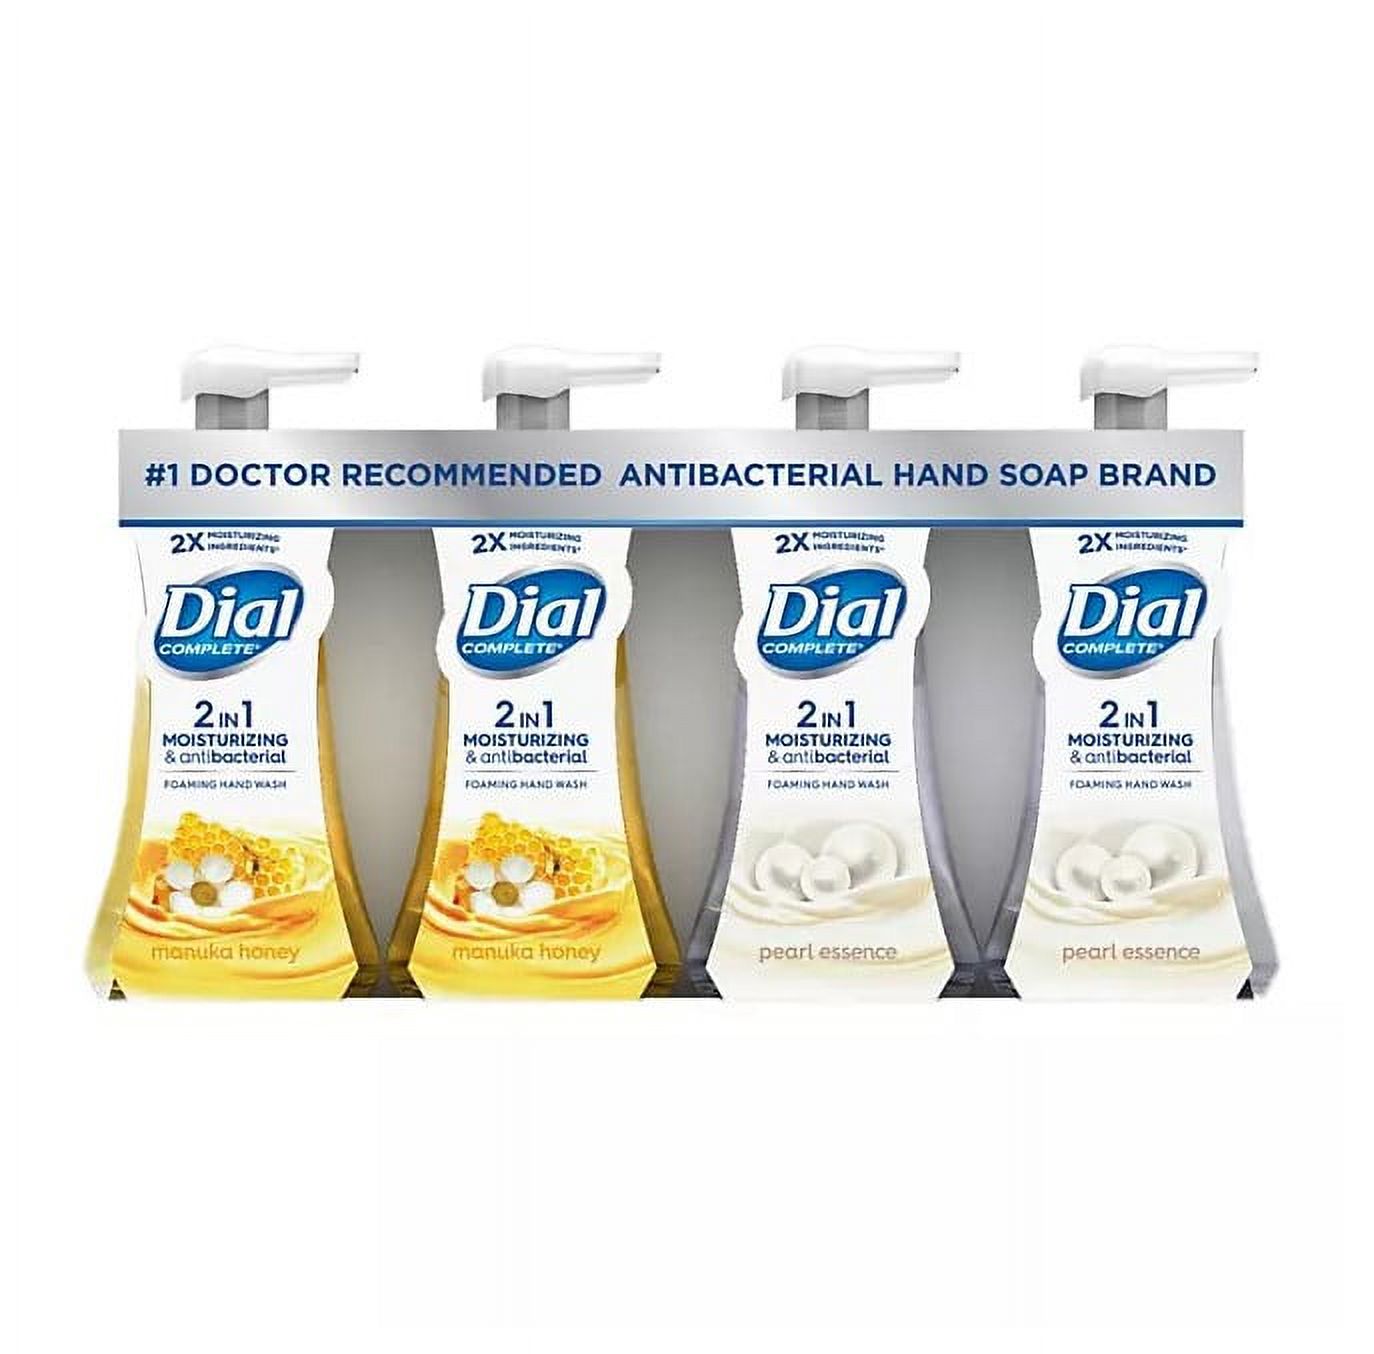 Dial Complete Antibacterial Foam Hand Soap, Variety Pack, 7.5 fl. oz., 4-count - image 1 of 2